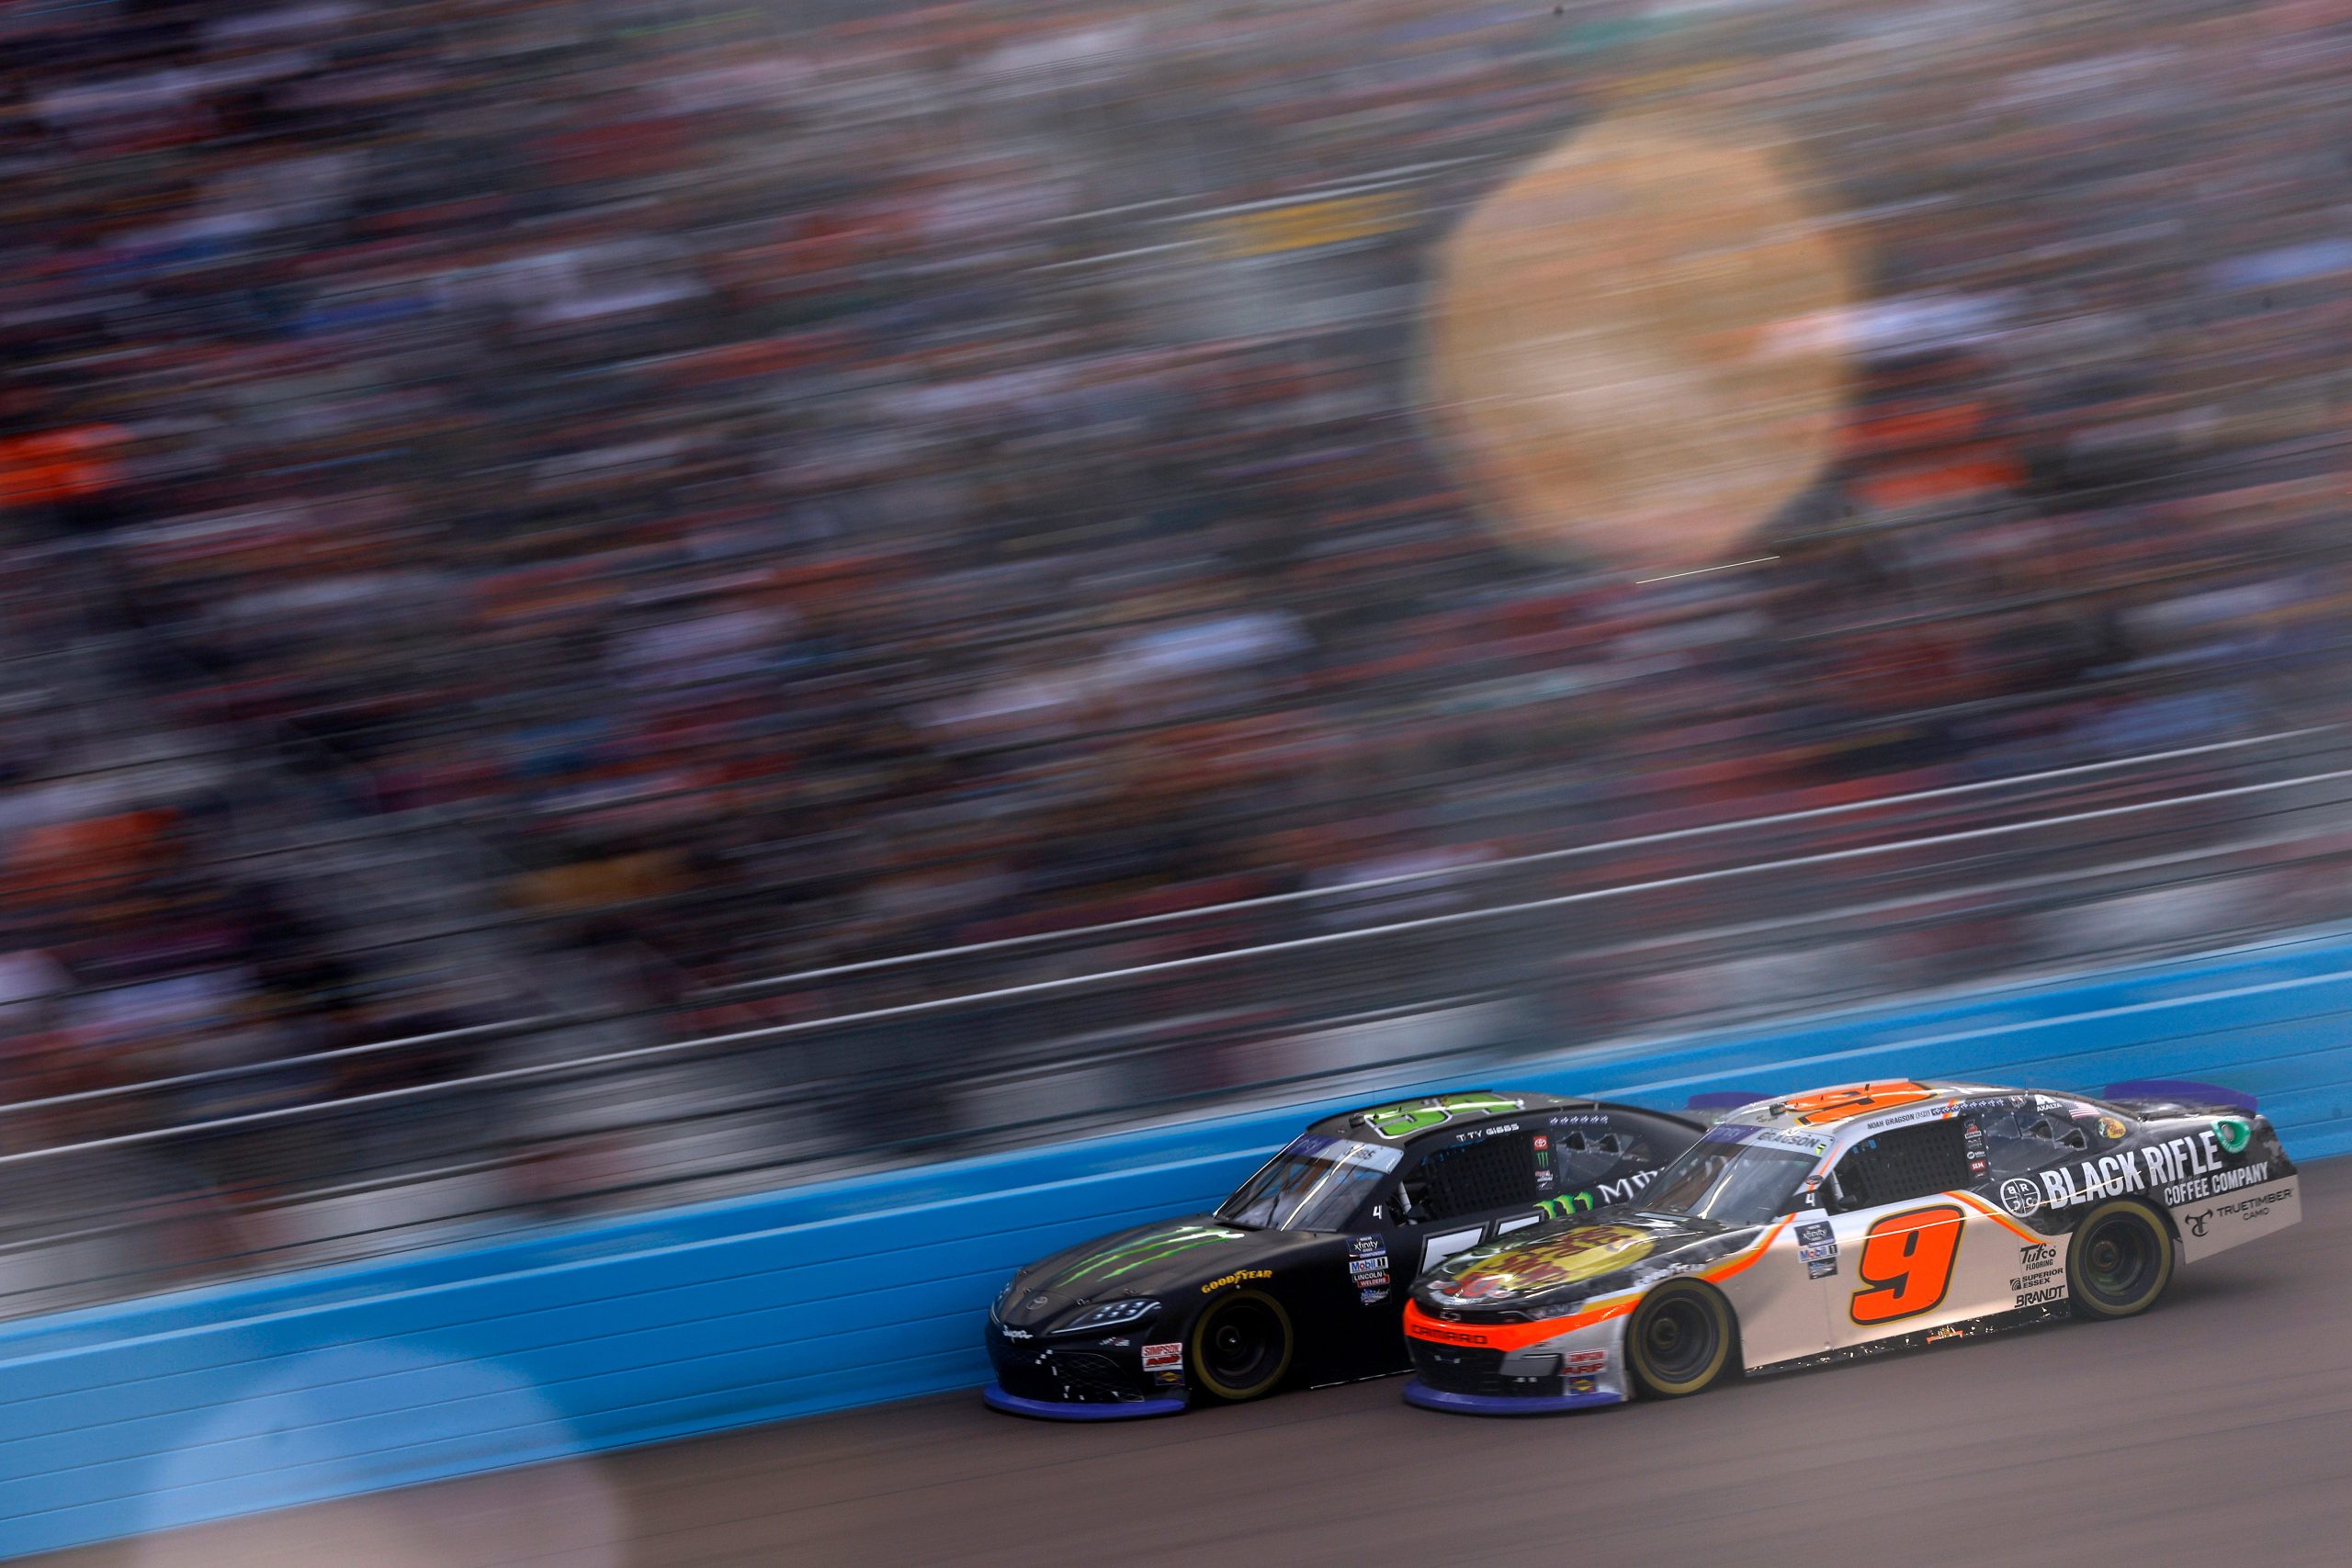 AVONDALE, ARIZONA - NOVEMBER 05: Ty Gibbs, driver of the #54 Monster Energy Toyota, and Noah Gragson, driver of the #9 Bass Pro Shops/TrueTimber/BRCC Chevrolet, race during the NASCAR Xfinity Series Championship at Phoenix Raceway on November 05, 2022 in Avondale, Arizona. (Photo by Jared C. Tilton/Getty Images)